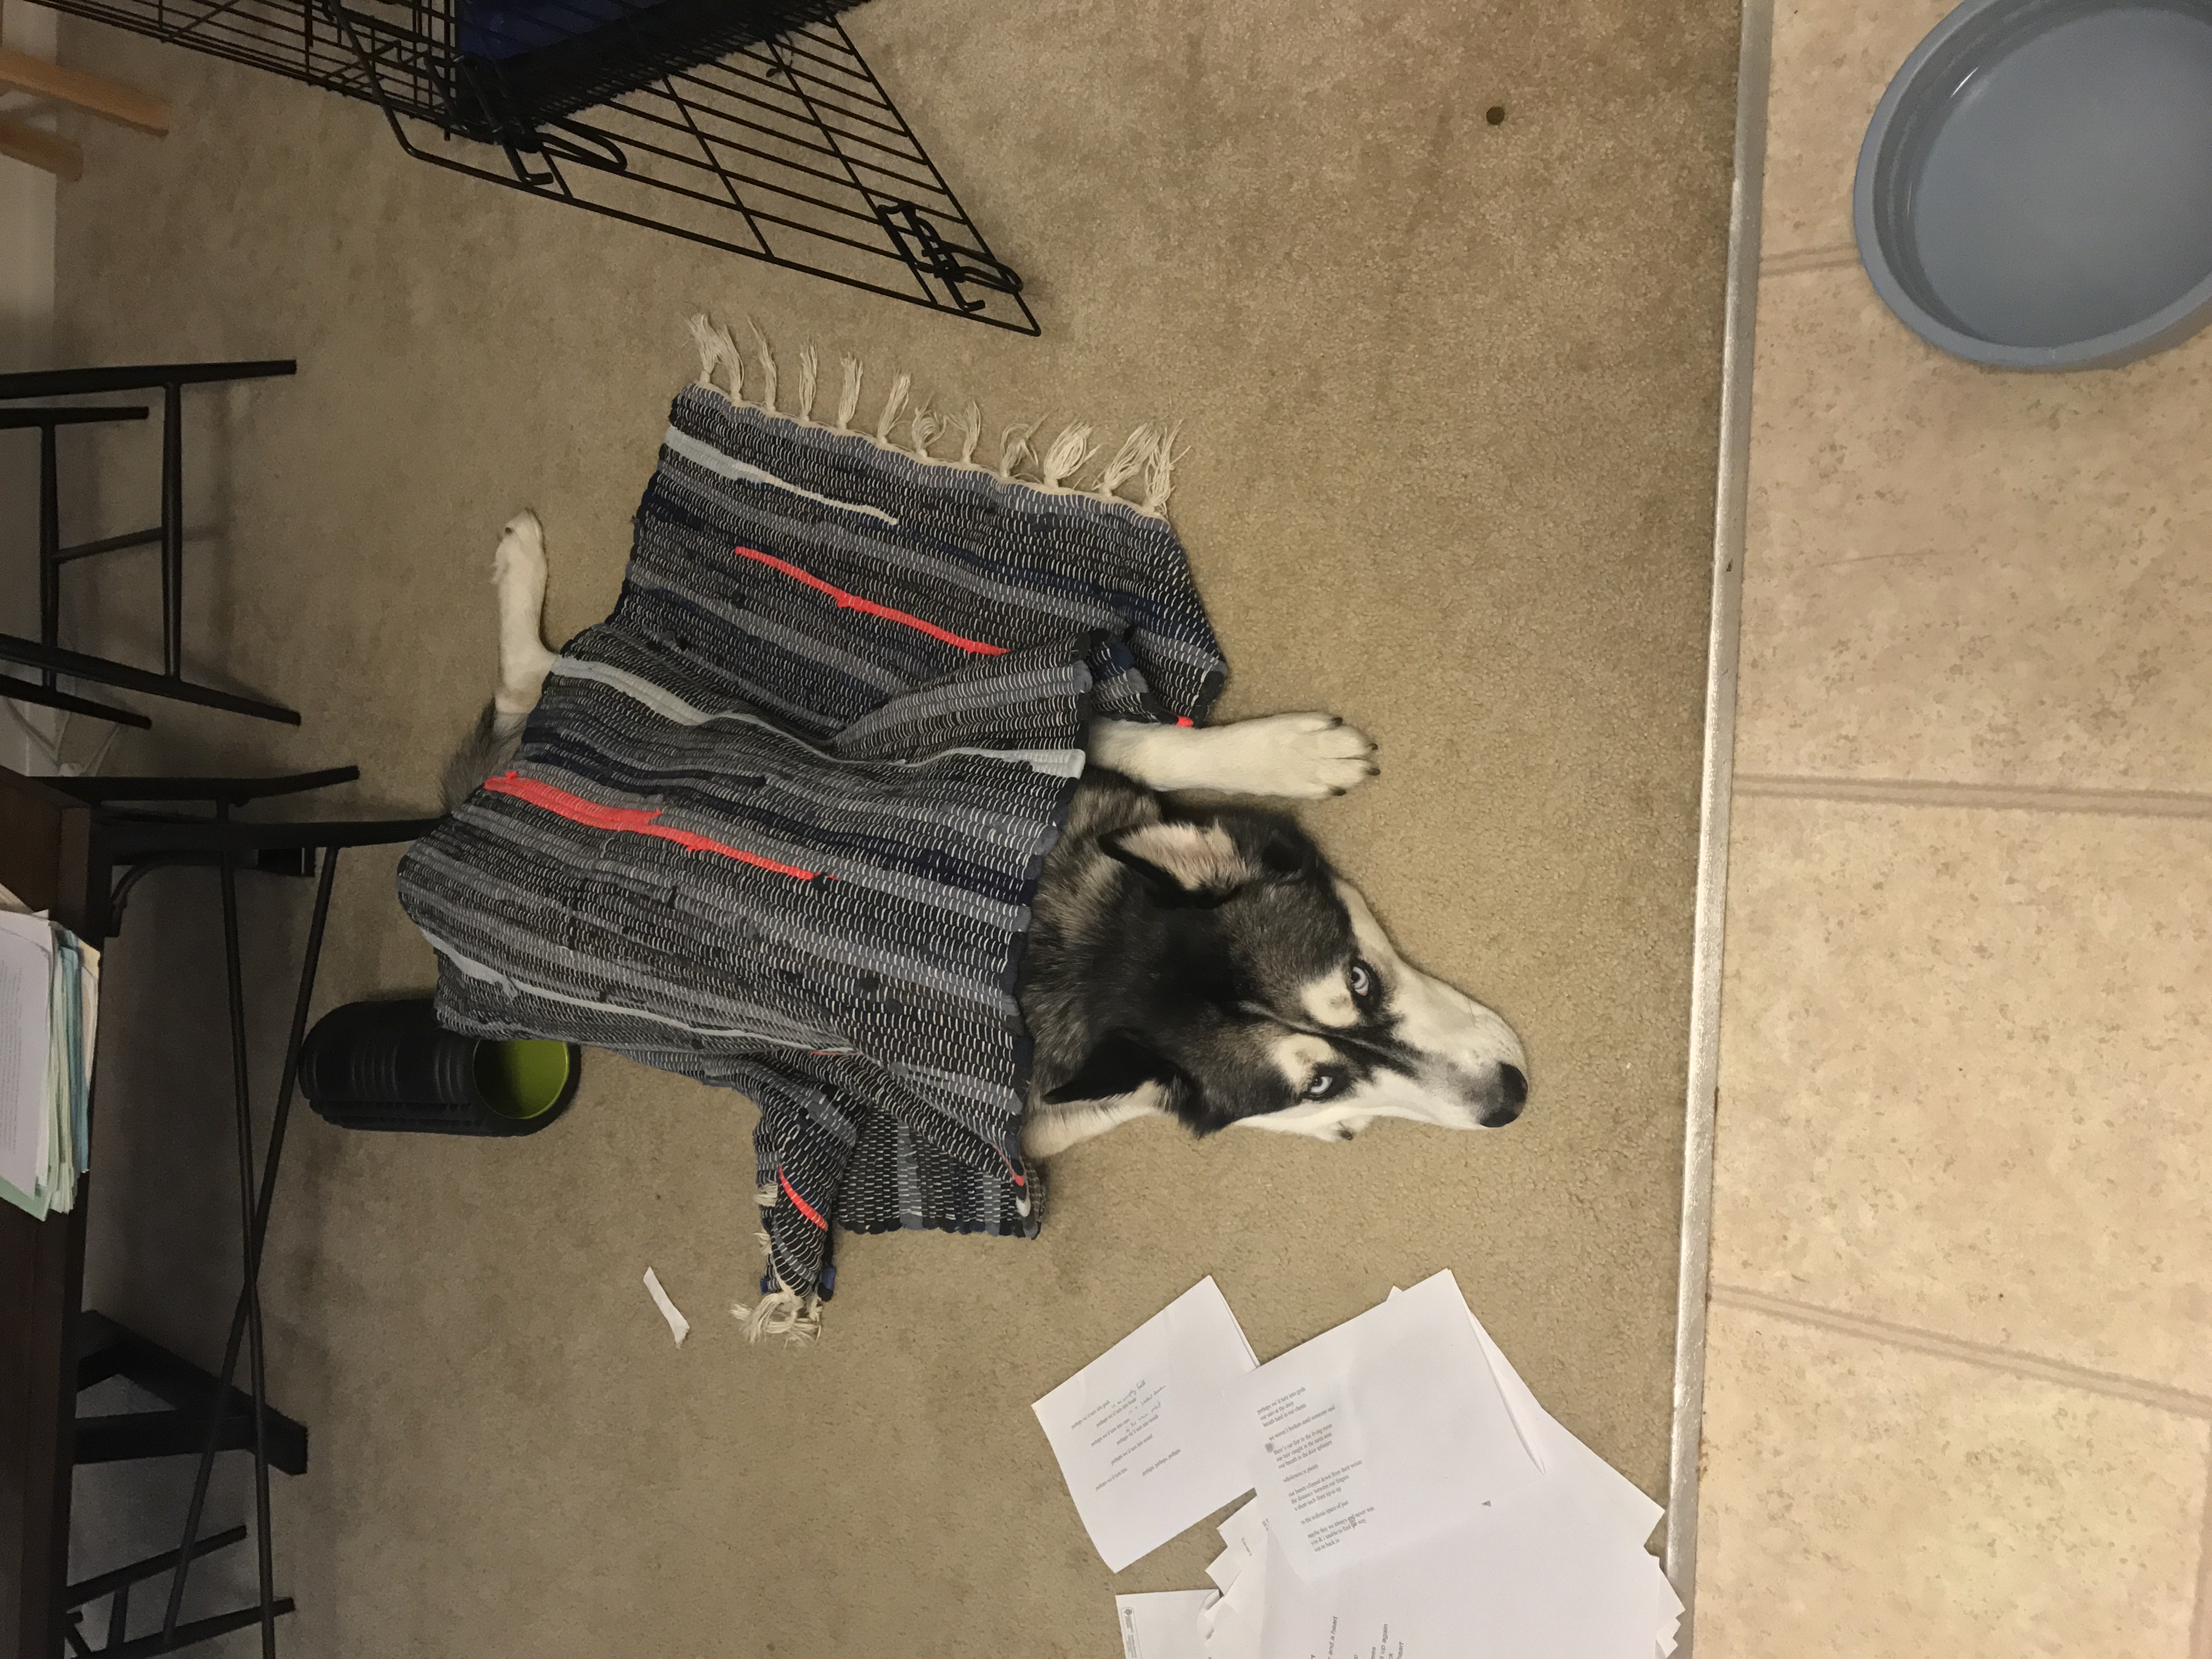 A black and white husky under a quilted rug next to a pile of dishelved papers in the living room.